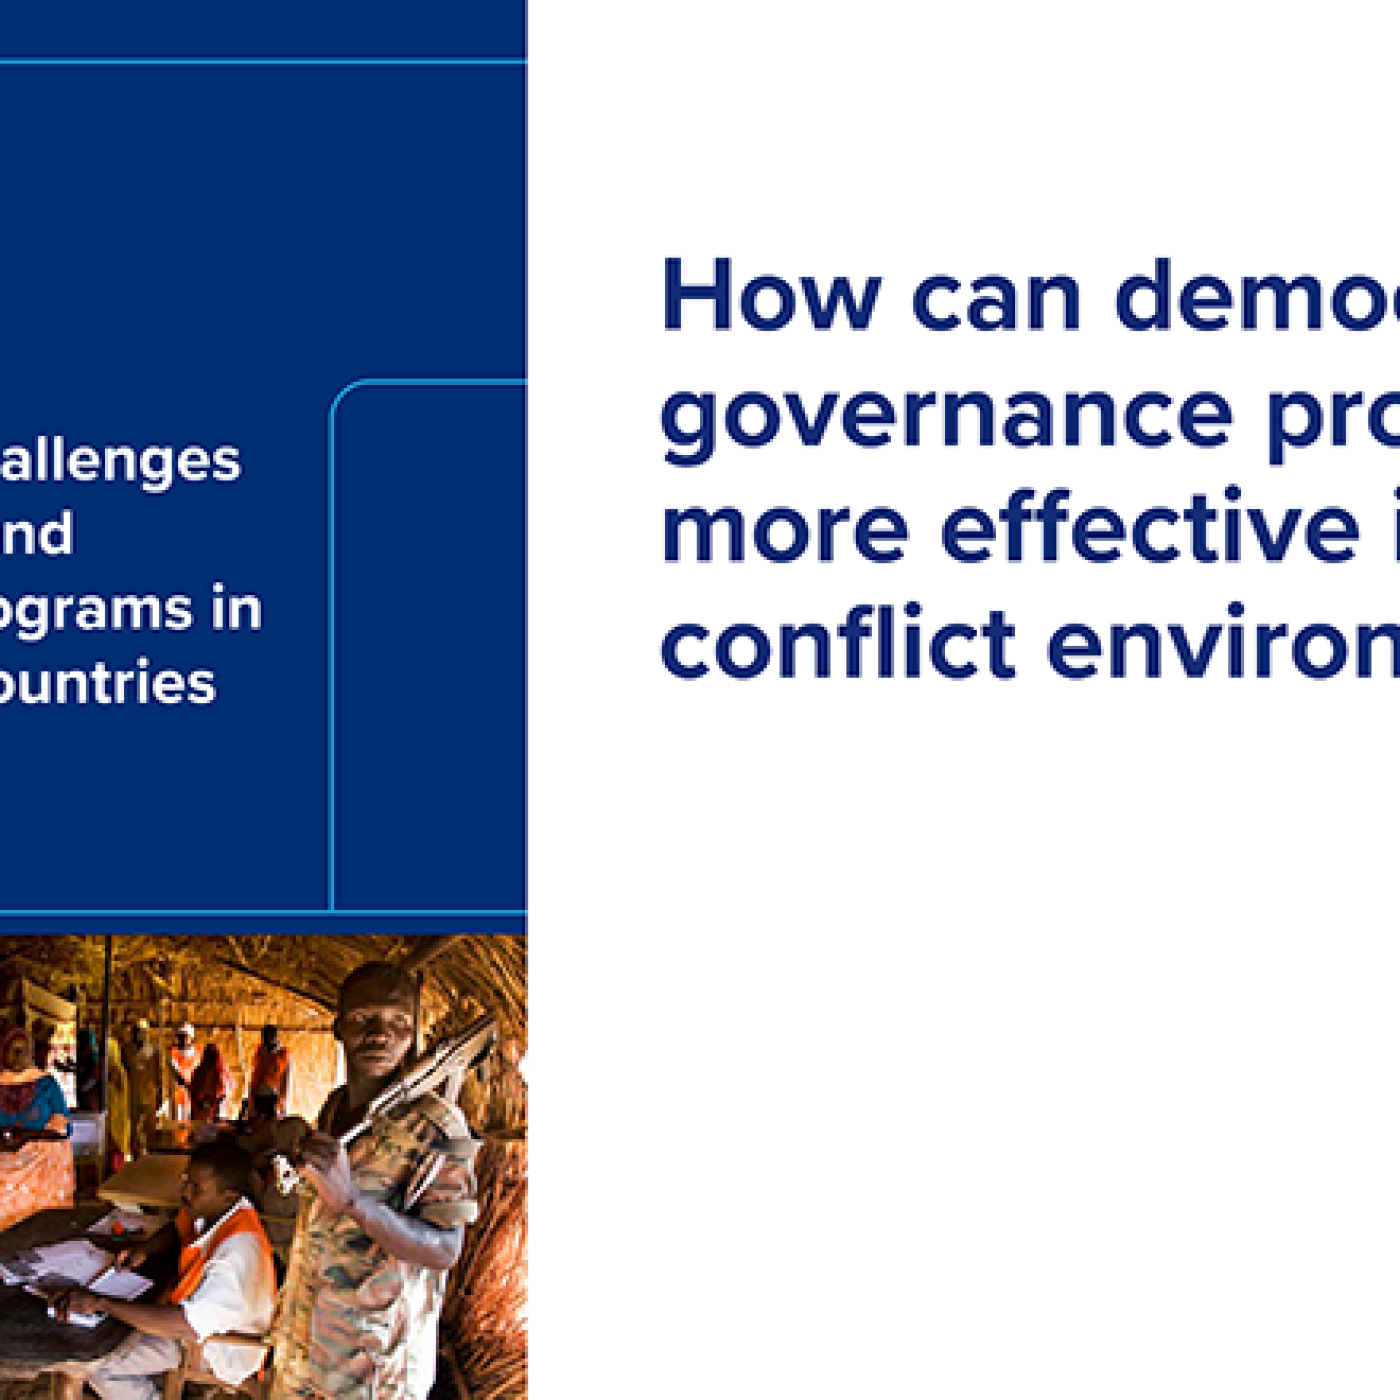 How can democracy and governance programs be more effective in post-conflict environments?